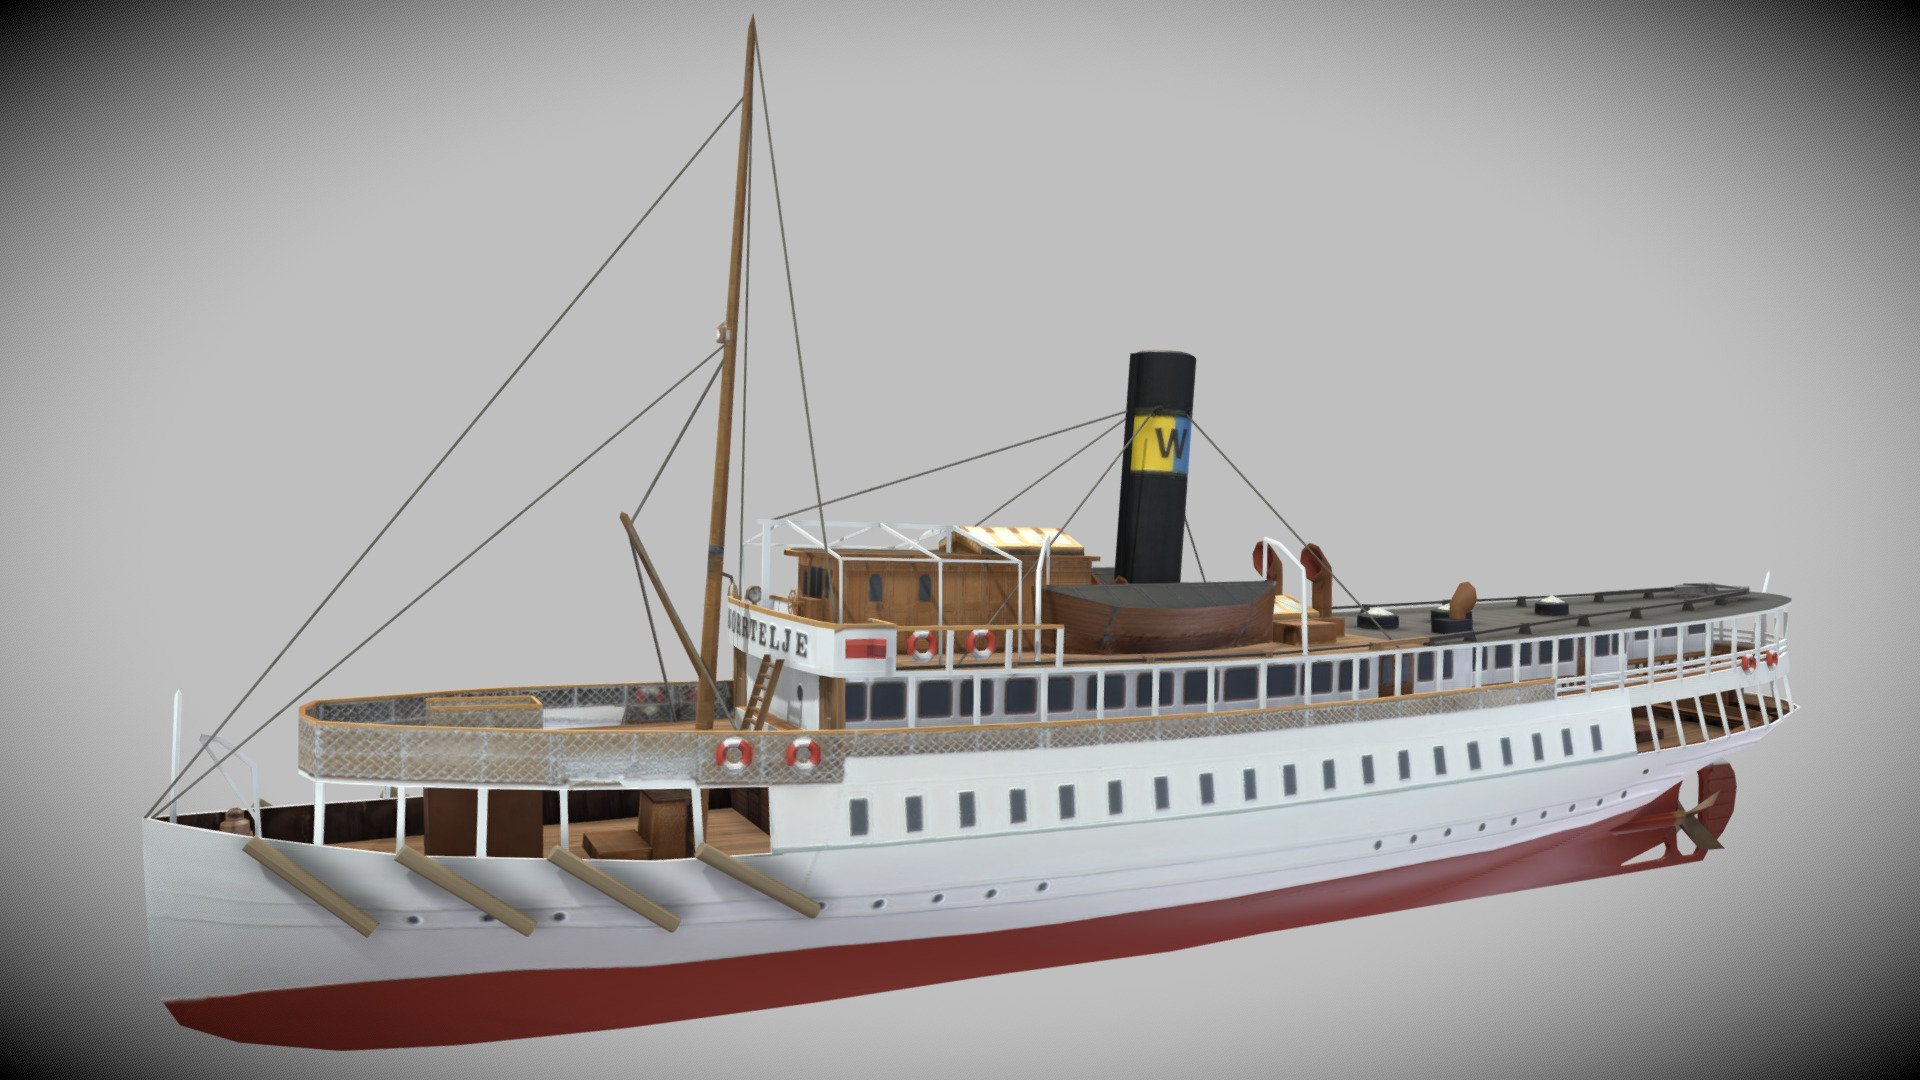 This is a low poly (&lt;10k) version of S/S Norrtelje, a 44 meter long passenger steamer built in Stockholm in 1900. I've made it (and her sister ship Express) for my Sthlm1925 project in Cities: Skylines.

A 1M tris 3D-scan of a physical model of this ship has been uploaded by the Swedish National Maritime And Transport Museums, under CC Attribution license.

This is loosely based on that scan, but I've modeled this completely from scratch. I've reused some parts of the texture.

So my model should look fairly similar to the 3D scan, but it has less than 1% of the geometry and one (diffuse) 1k  texture instead of four 8k textures 3d model